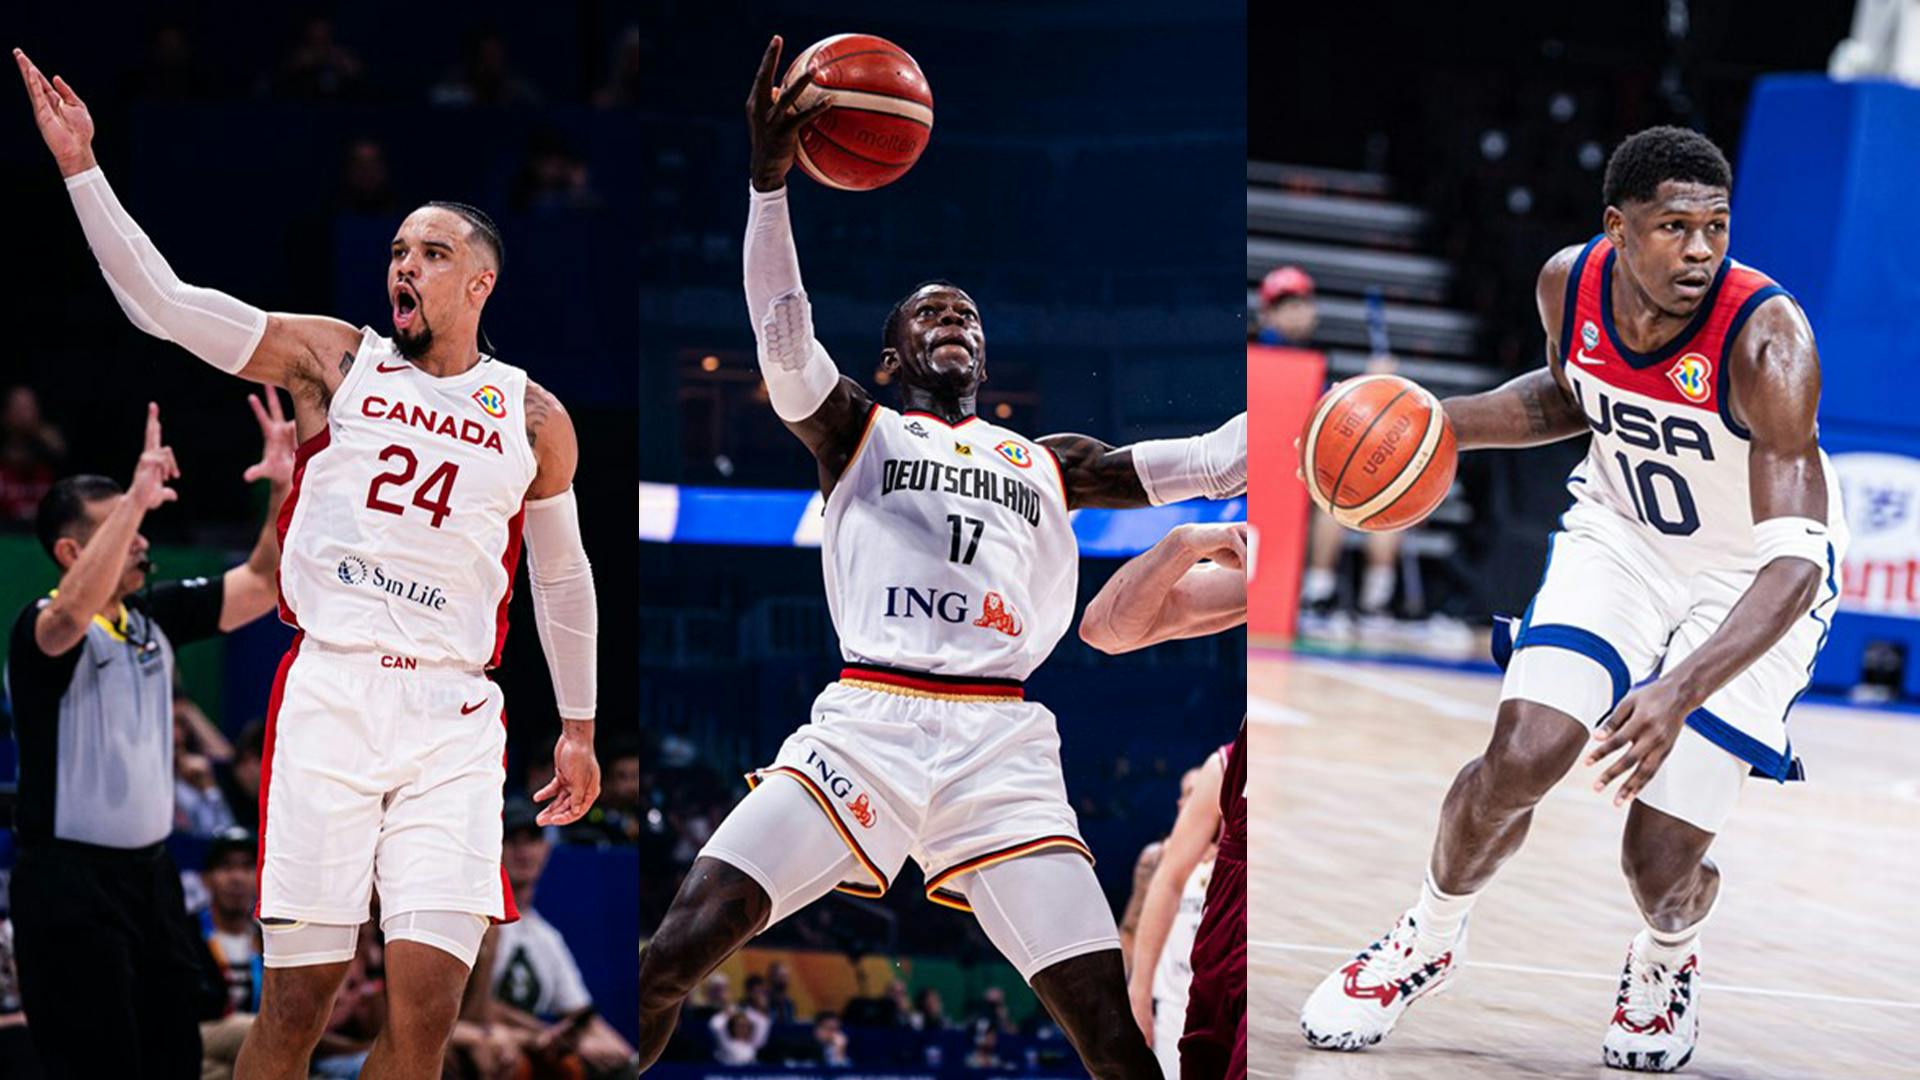 FIBA World Cup awards: Check out who took home individual trophies